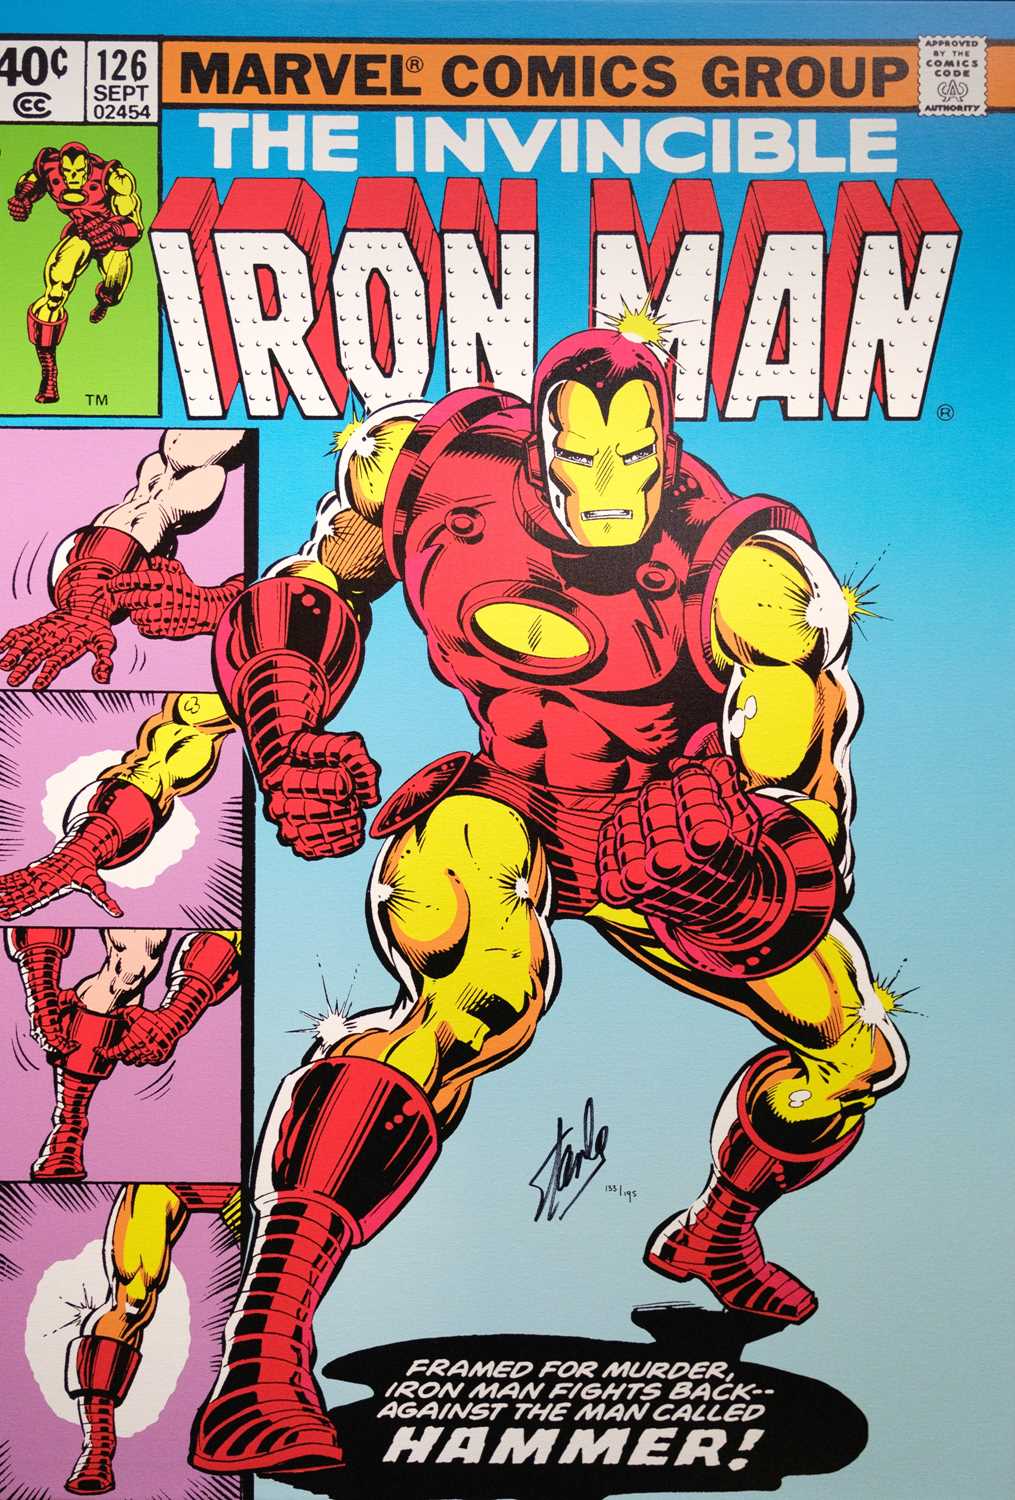 (Signed) Stan LEE (1922-2018) The Invincible Iron Man #126 - Iron Man Fights Back (2015) - Bild 2 aus 4